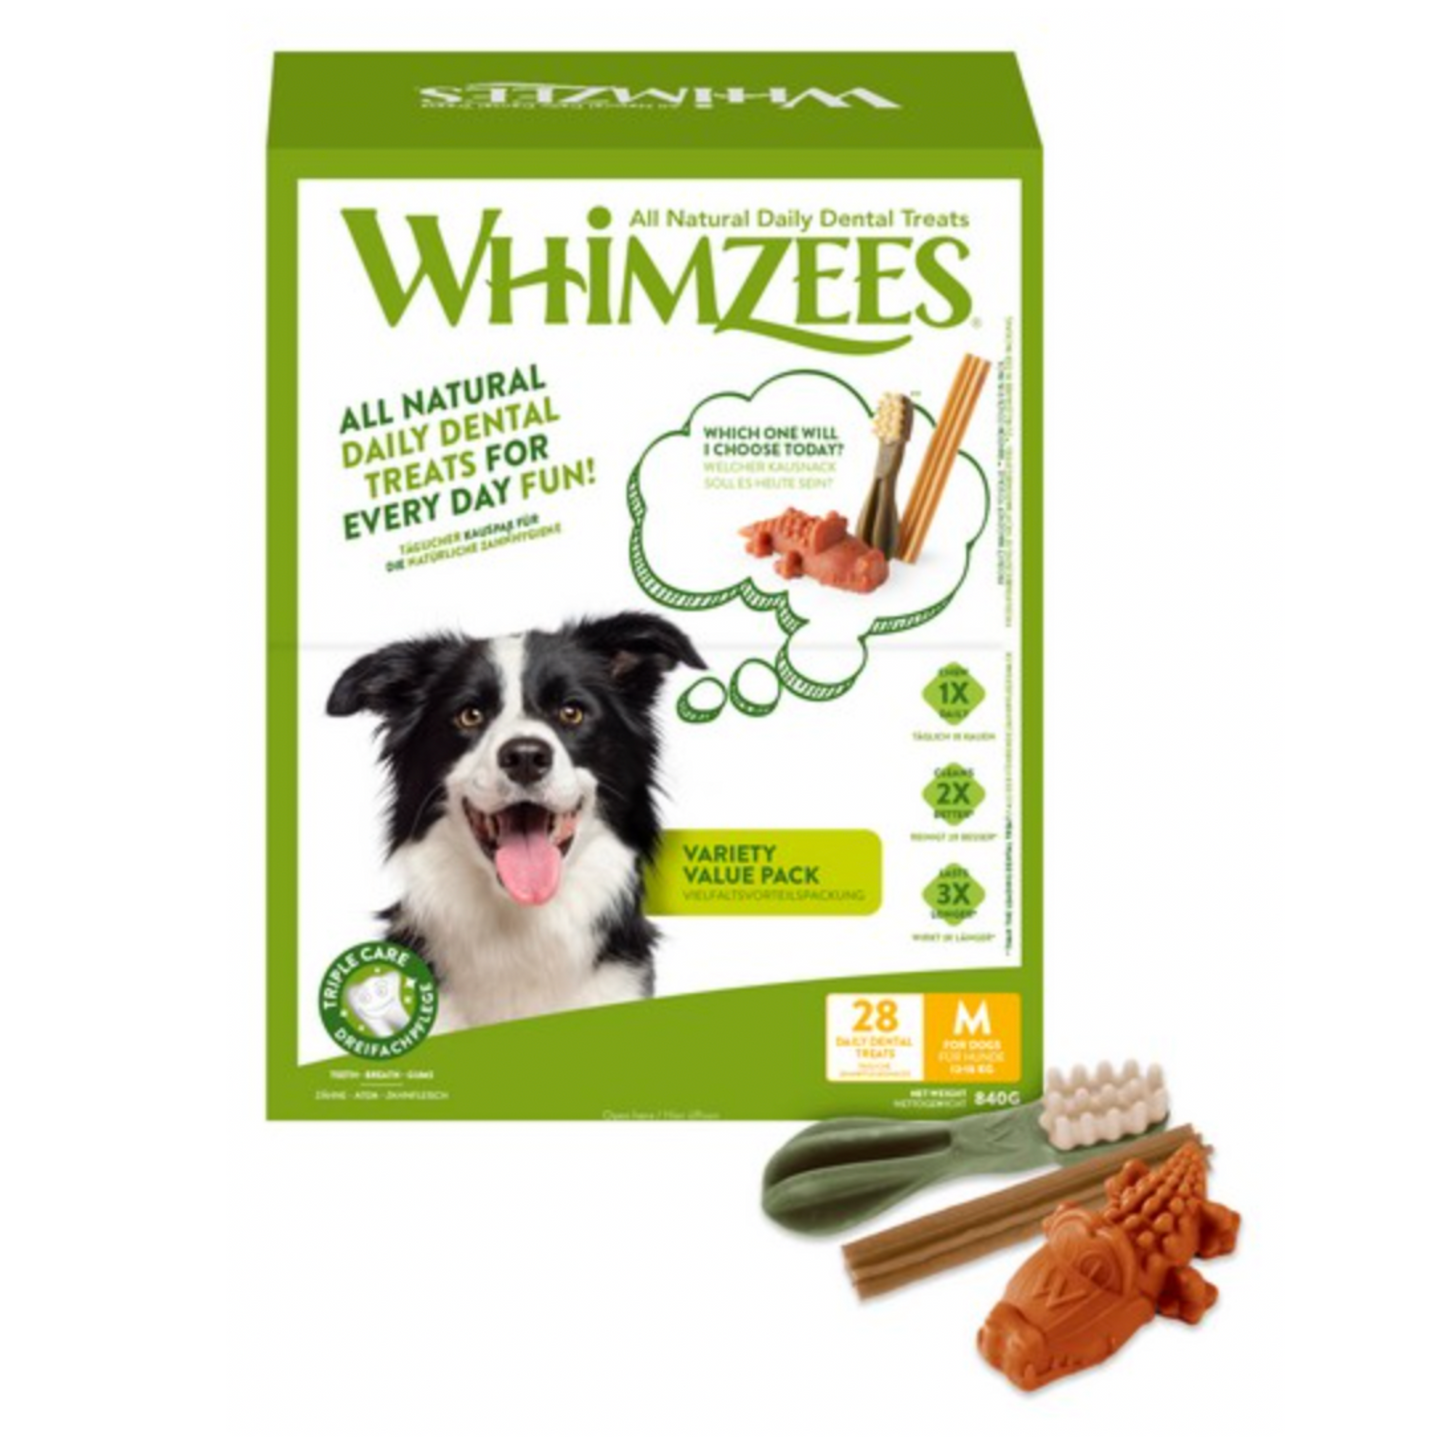 Whimzees Variety Value Box Natural Grain Free Dog Treats For Medium Size Breeds 28 Pieces